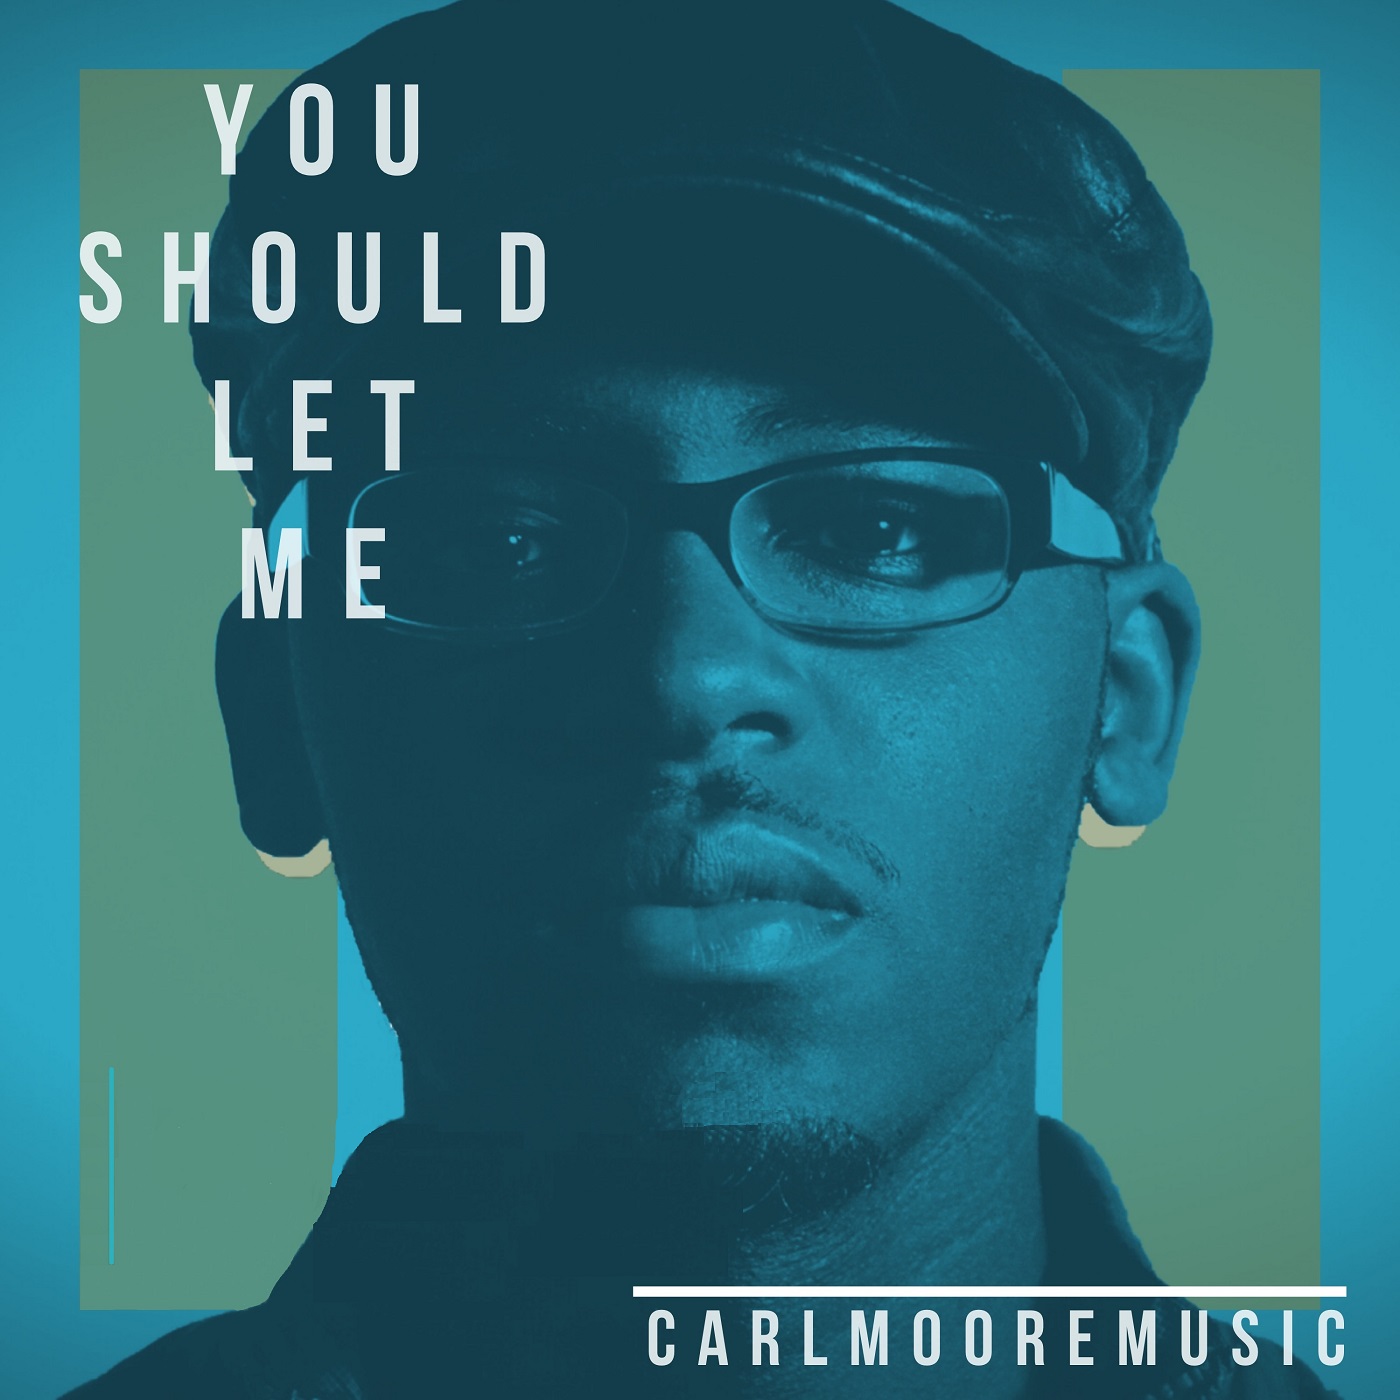 Carl Moore Music's cover art for You Should Let Me